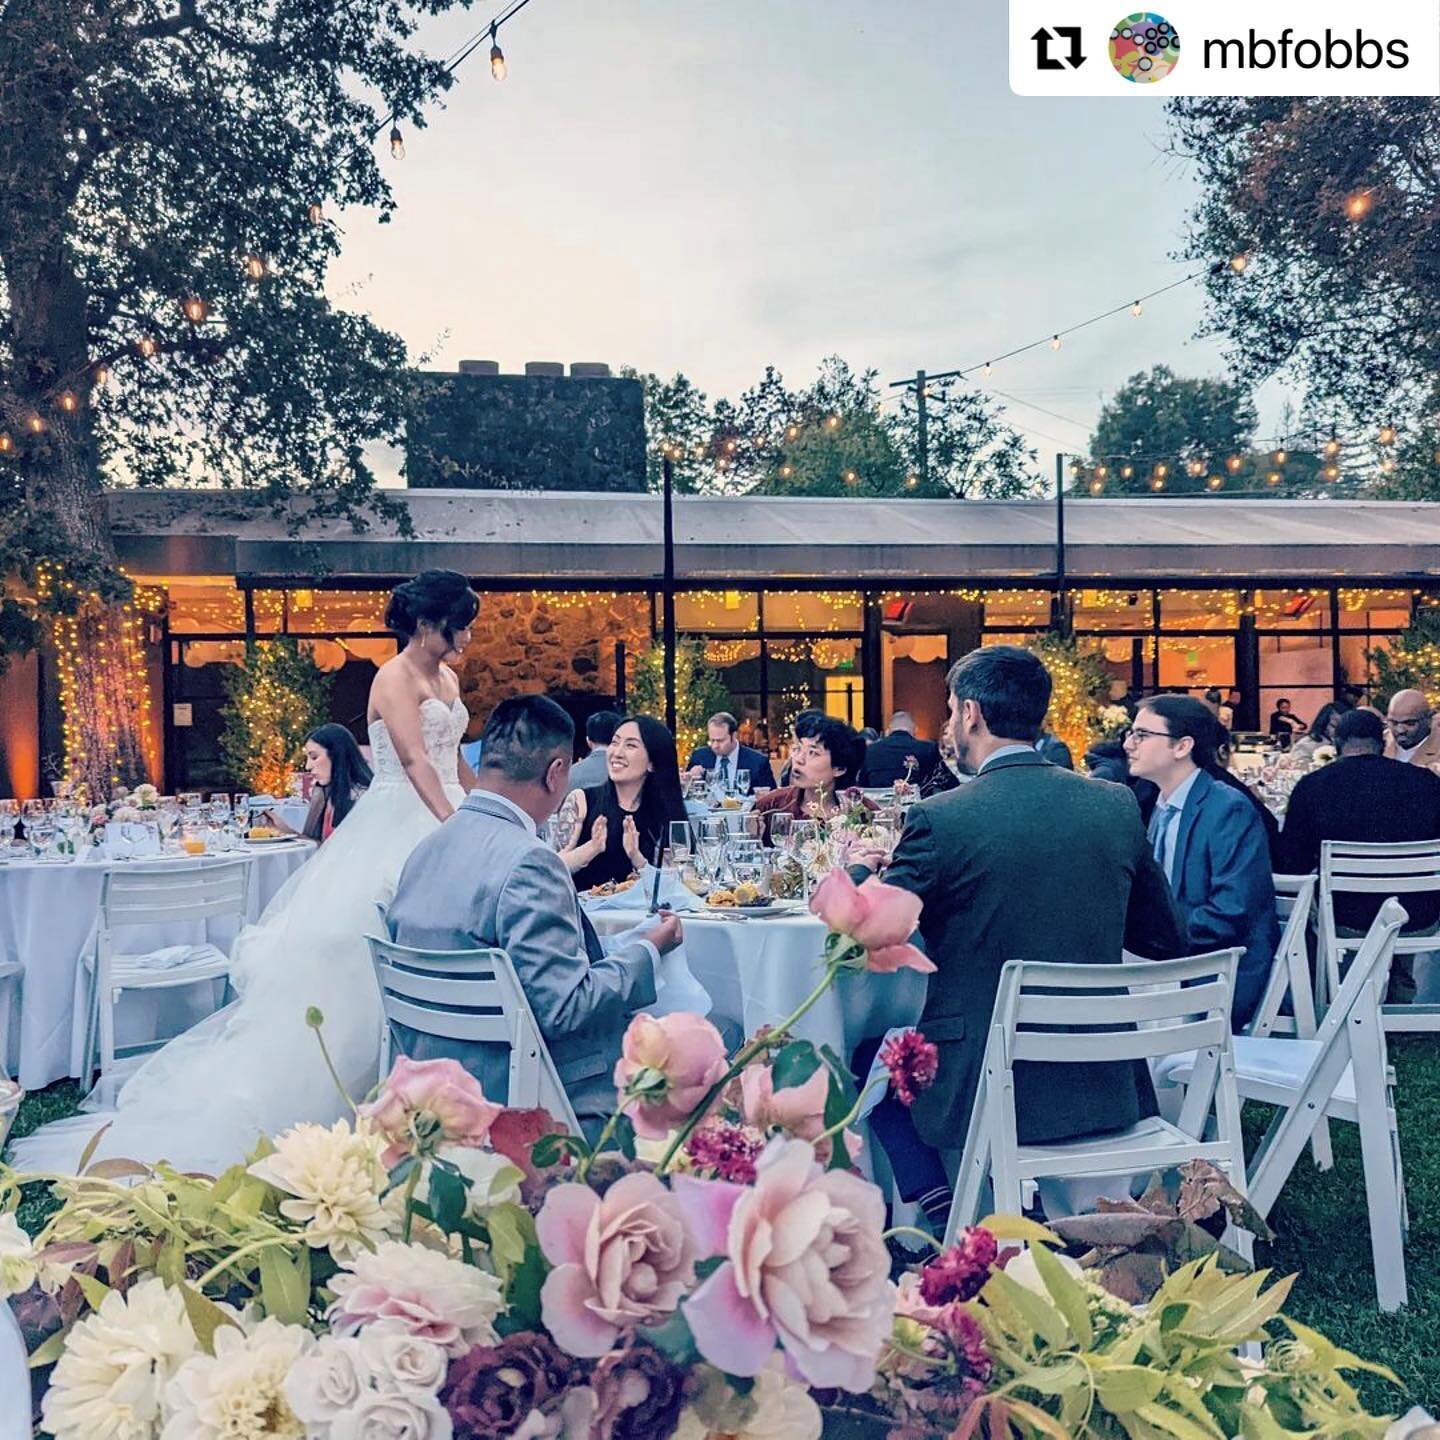 When our groom reveals his romantic side and refers to his wife as &ldquo;my beautiful bride&rdquo; (read below!) 🥰

#Repost @mbfobbs with @use.repost
・・・
My beautiful bride greeting some of our lovely friends @grace_is_always_greener 

#awwww &hear